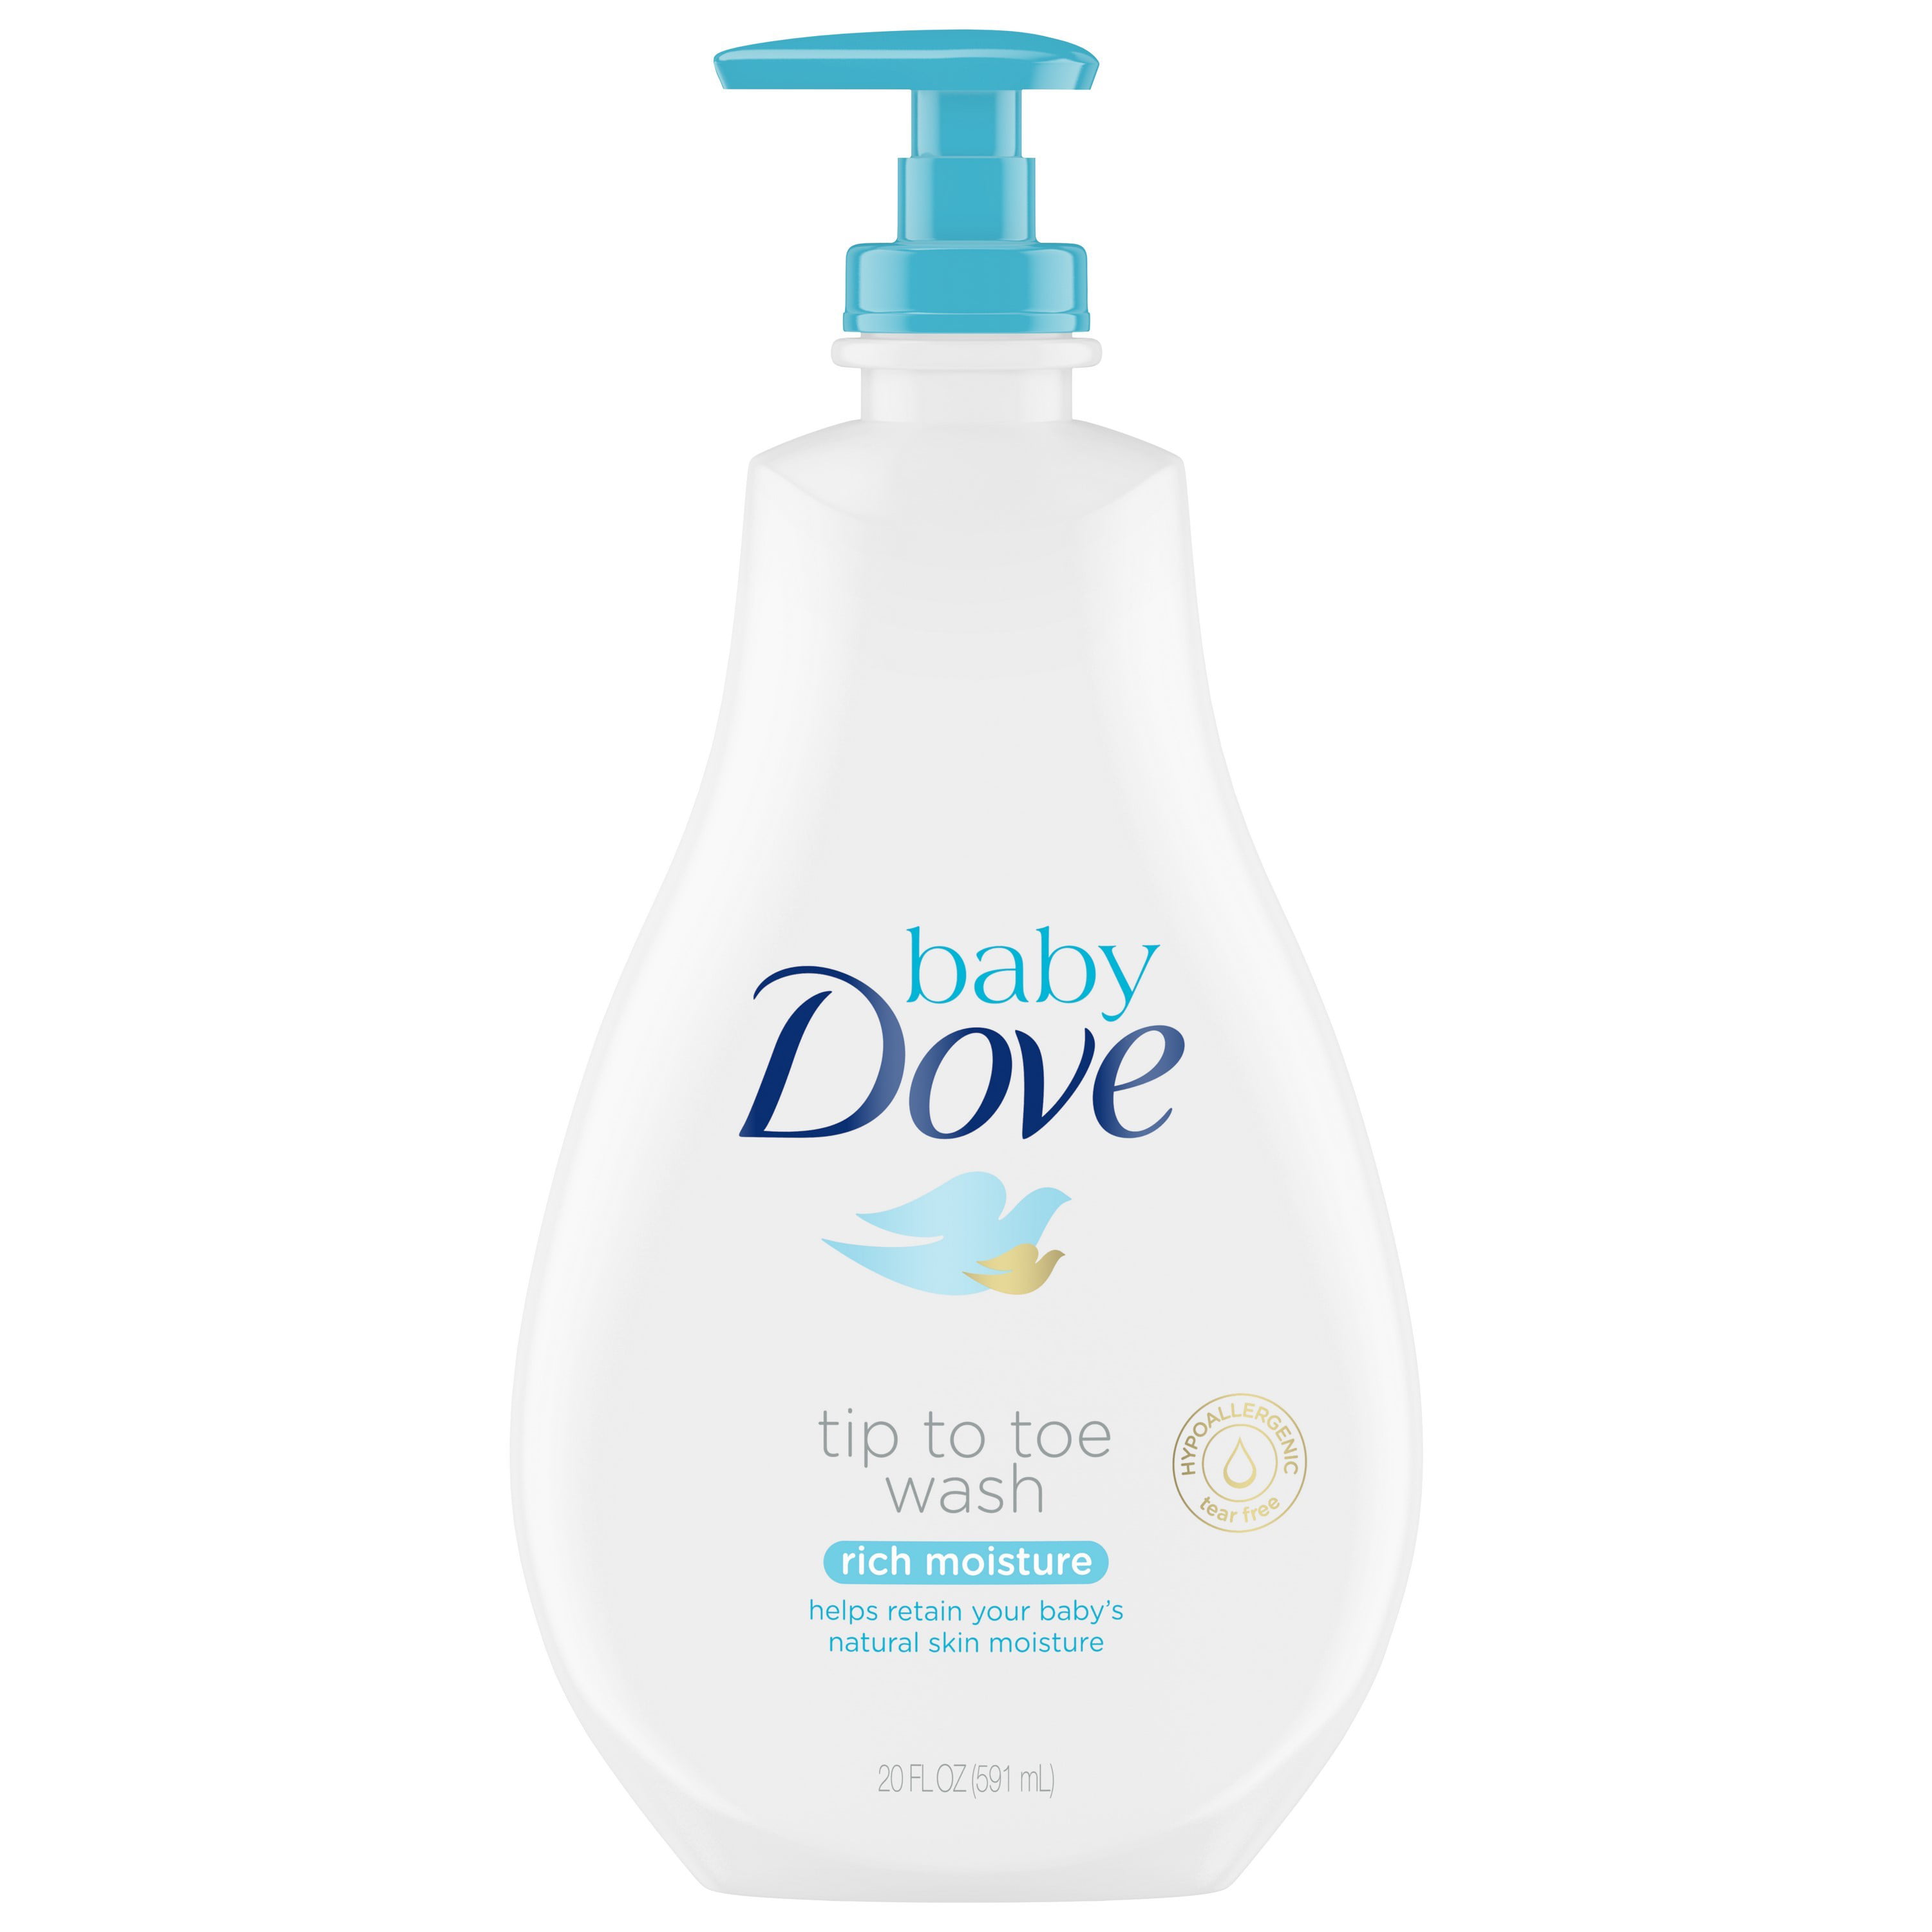 Baby Dove Tip to Toe Rich Moisture Baby 